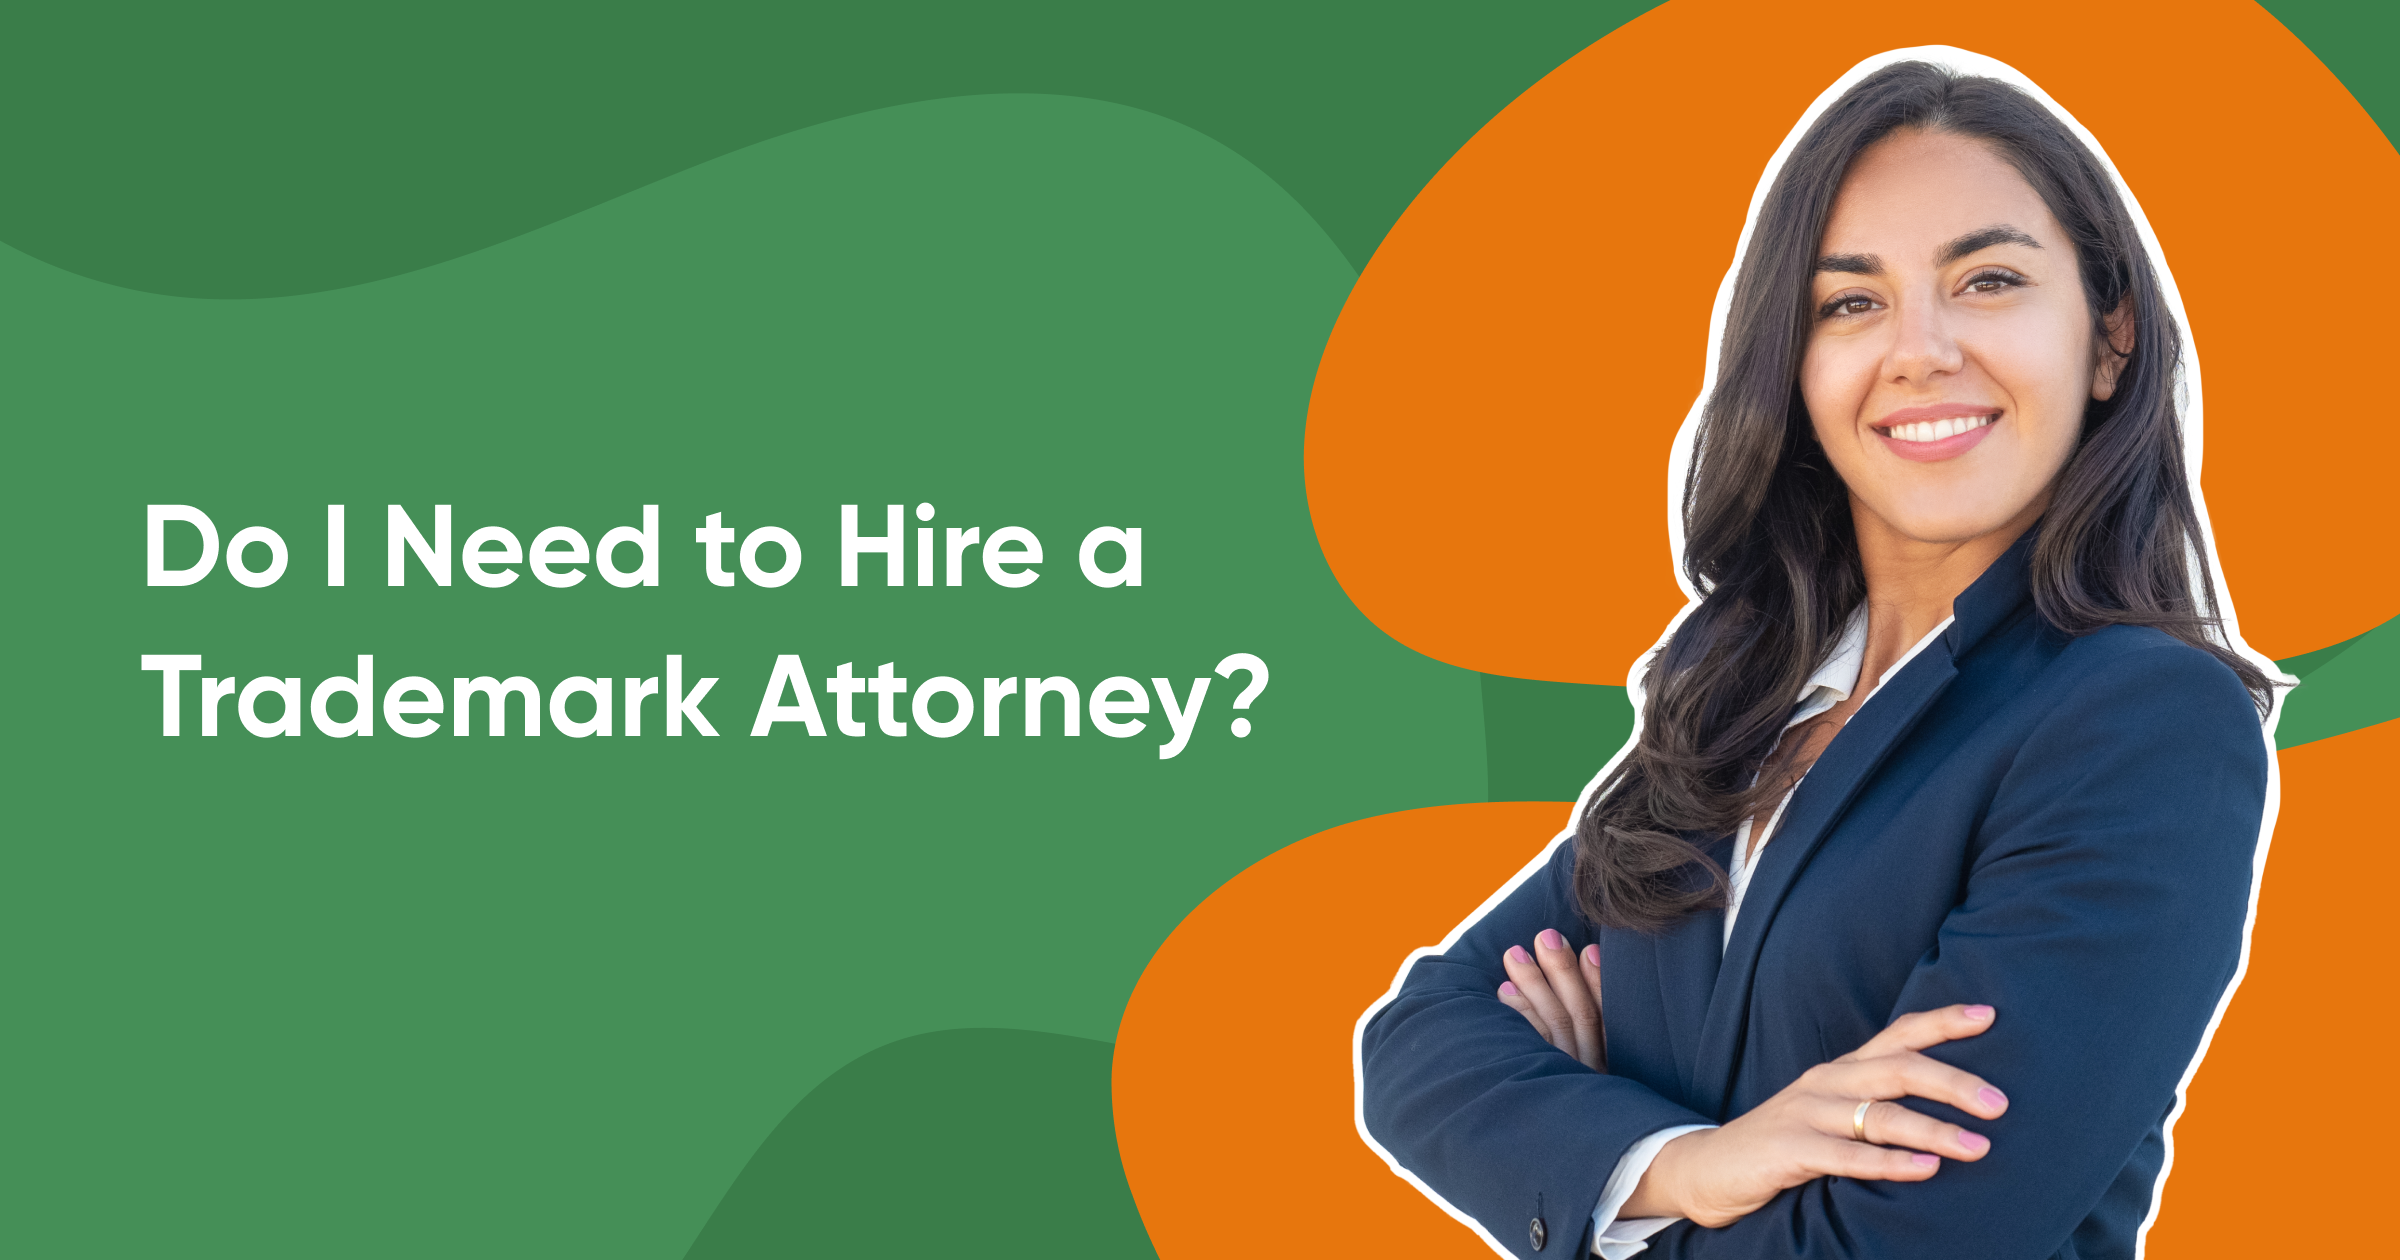 Do I need to hire a trademark attorney?